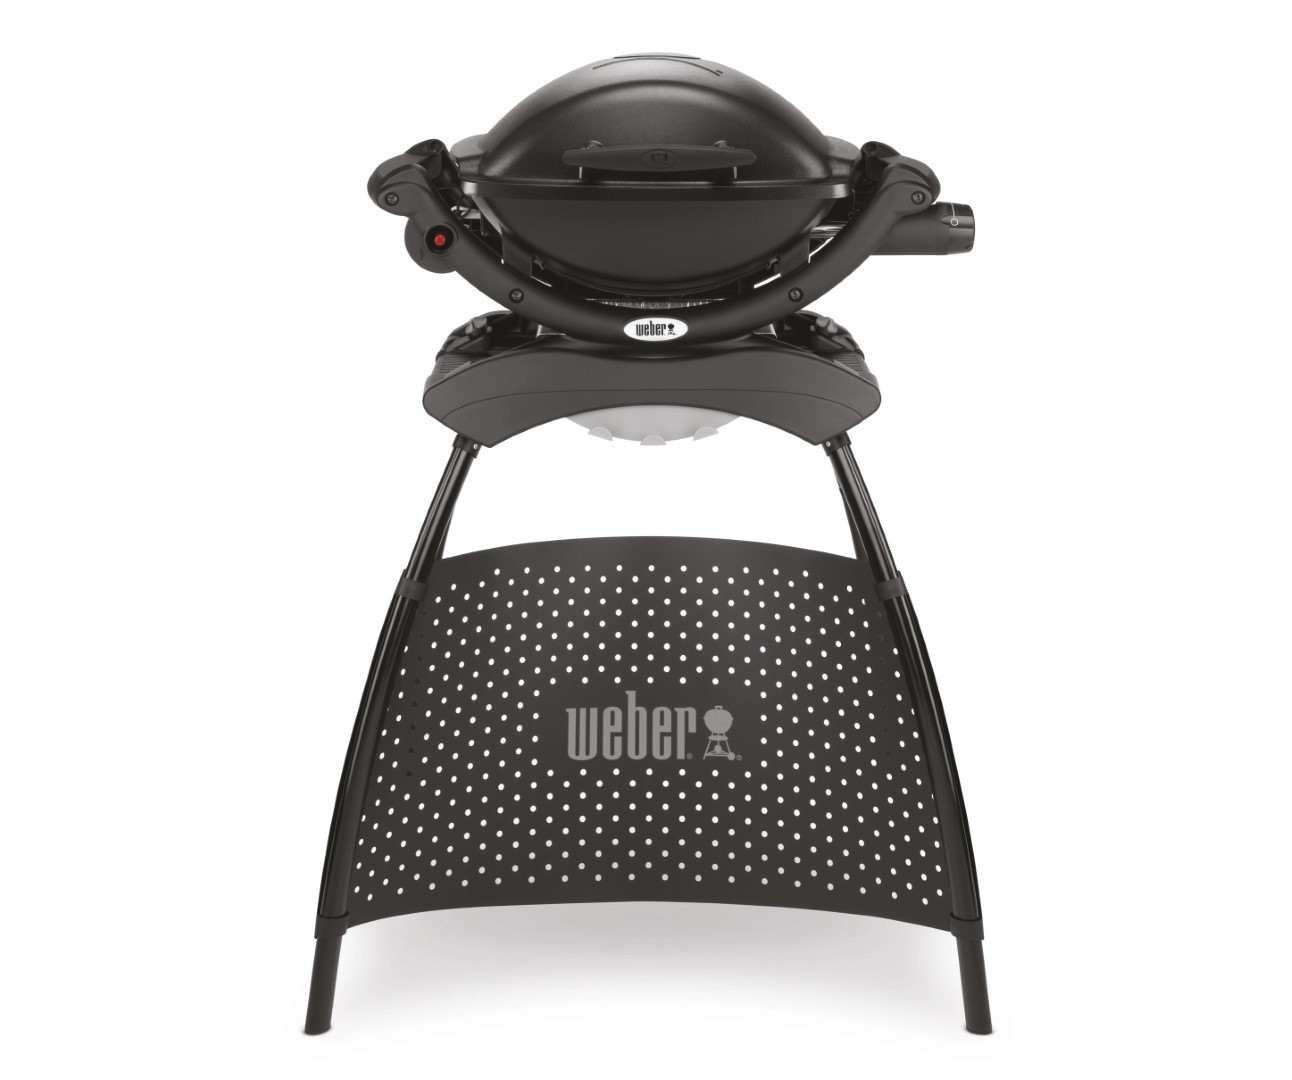 https://www.warentuin.nl/media/catalog/product/1/7/1770077924065507_weber_gas_barbecue_gas_barbecue_q_1000_stand_black_weber_659d.jpg